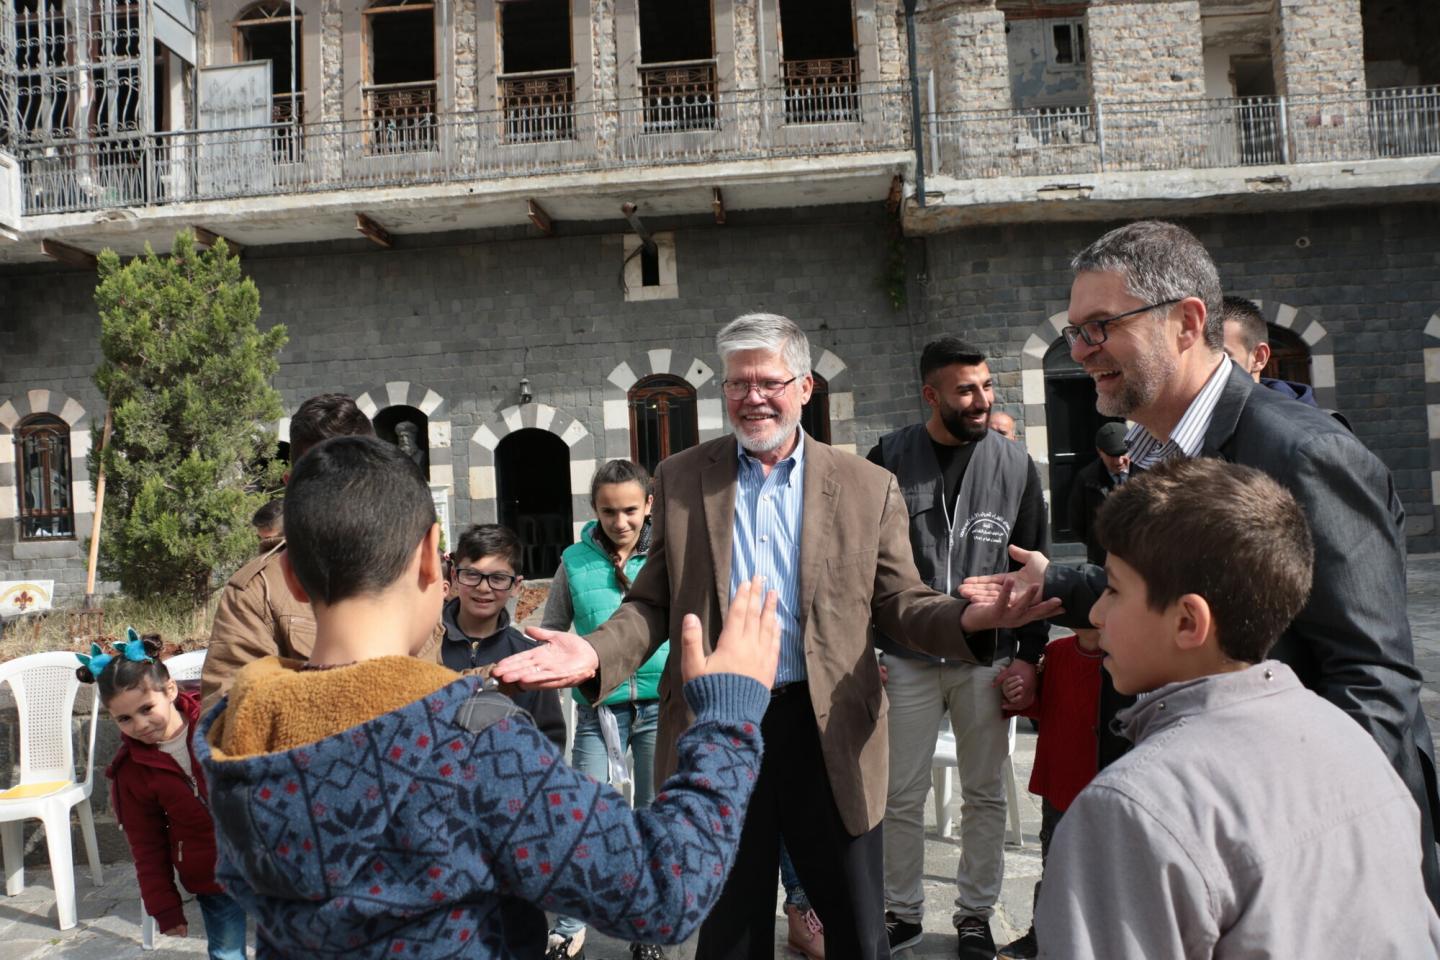 Two North American men greet Syrian children outside a stone building